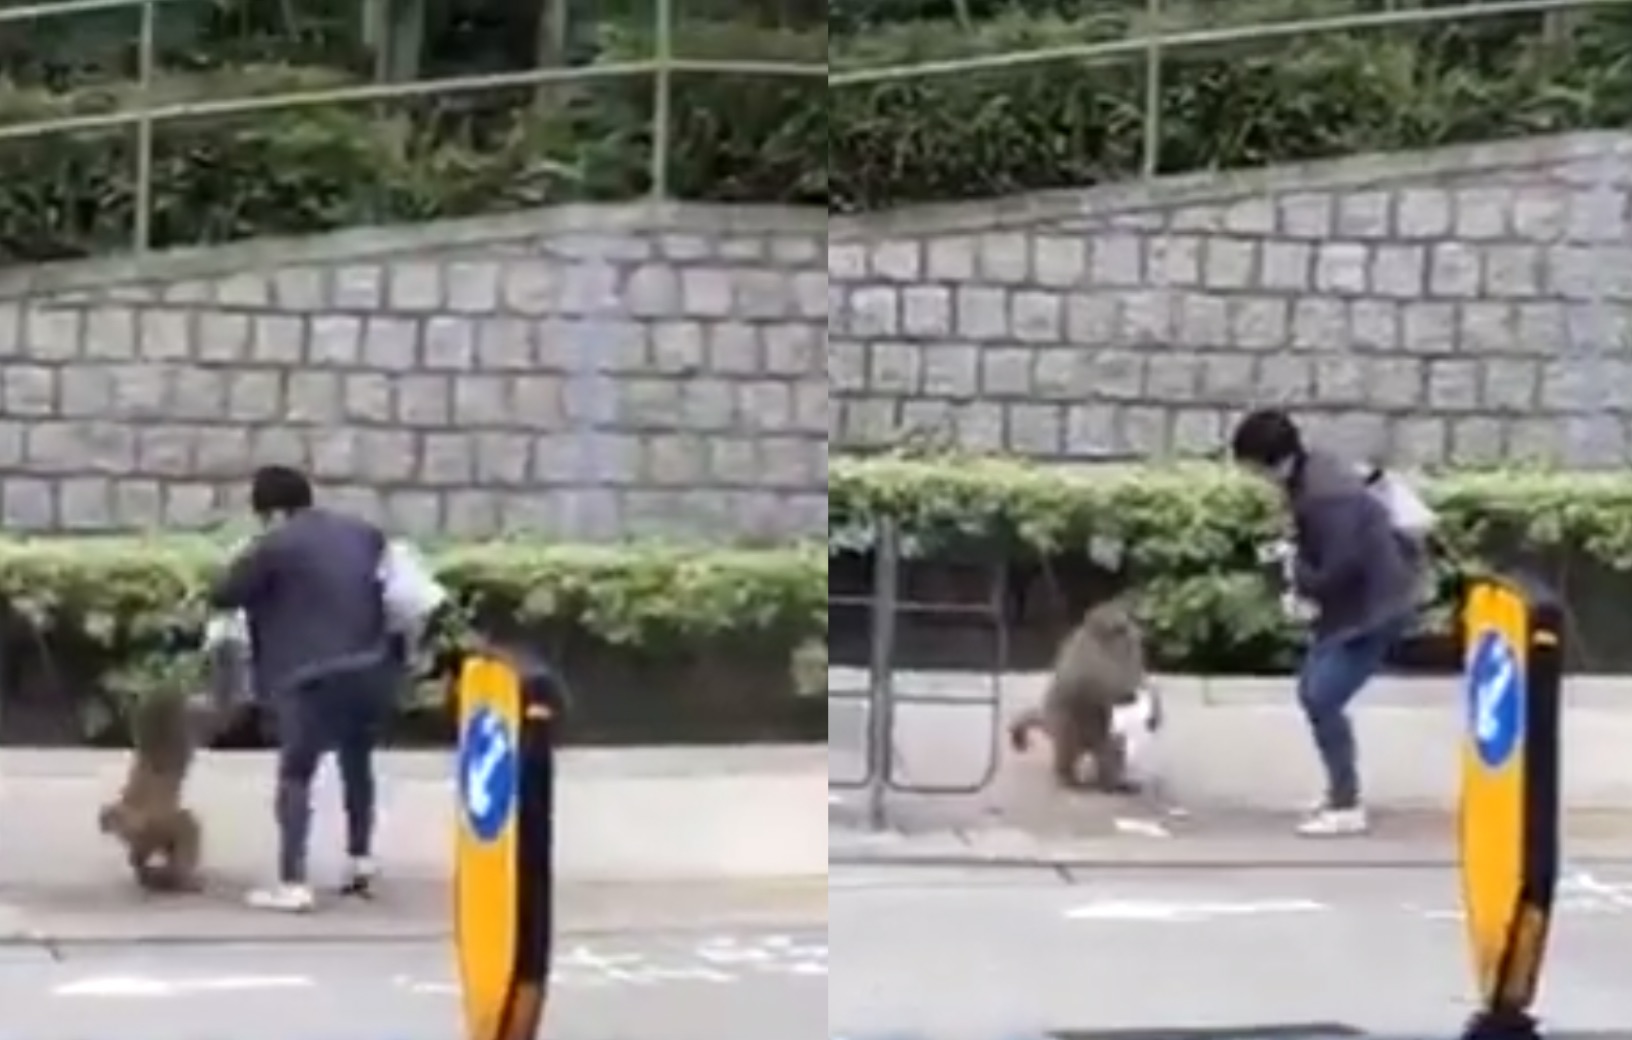 A monkey is caught on camera stealing a bag of food from an unsuspecting woman in Tai Wai. Screengrab via YouTube.